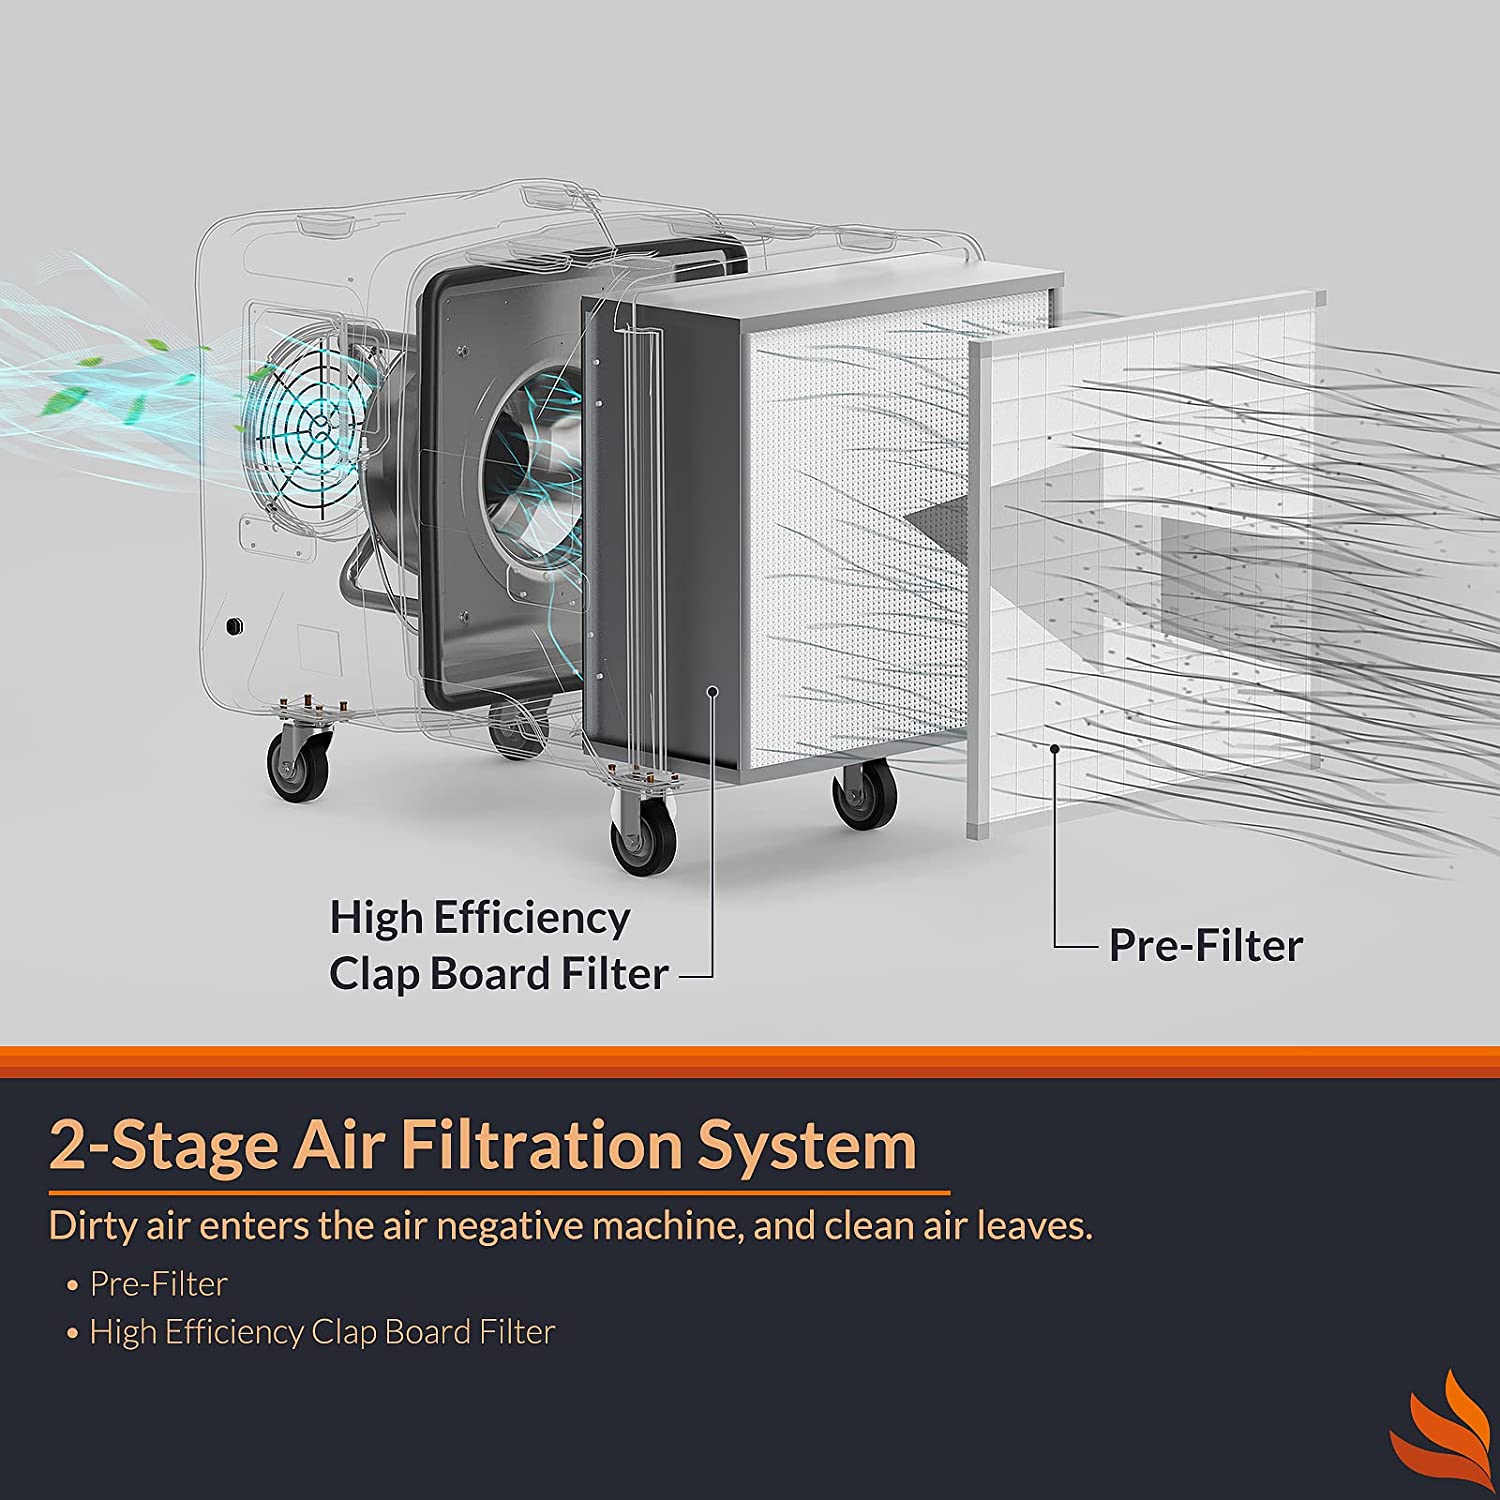 Purisystems PuriCare S2 Industrial Air Filtration System 2000 CFM, Heavy Duty HEPA Air 2-in 1 Filtration Air Cleaner for Water/Fire Damage Restoration, Renovation, Commercial/Industrial Use